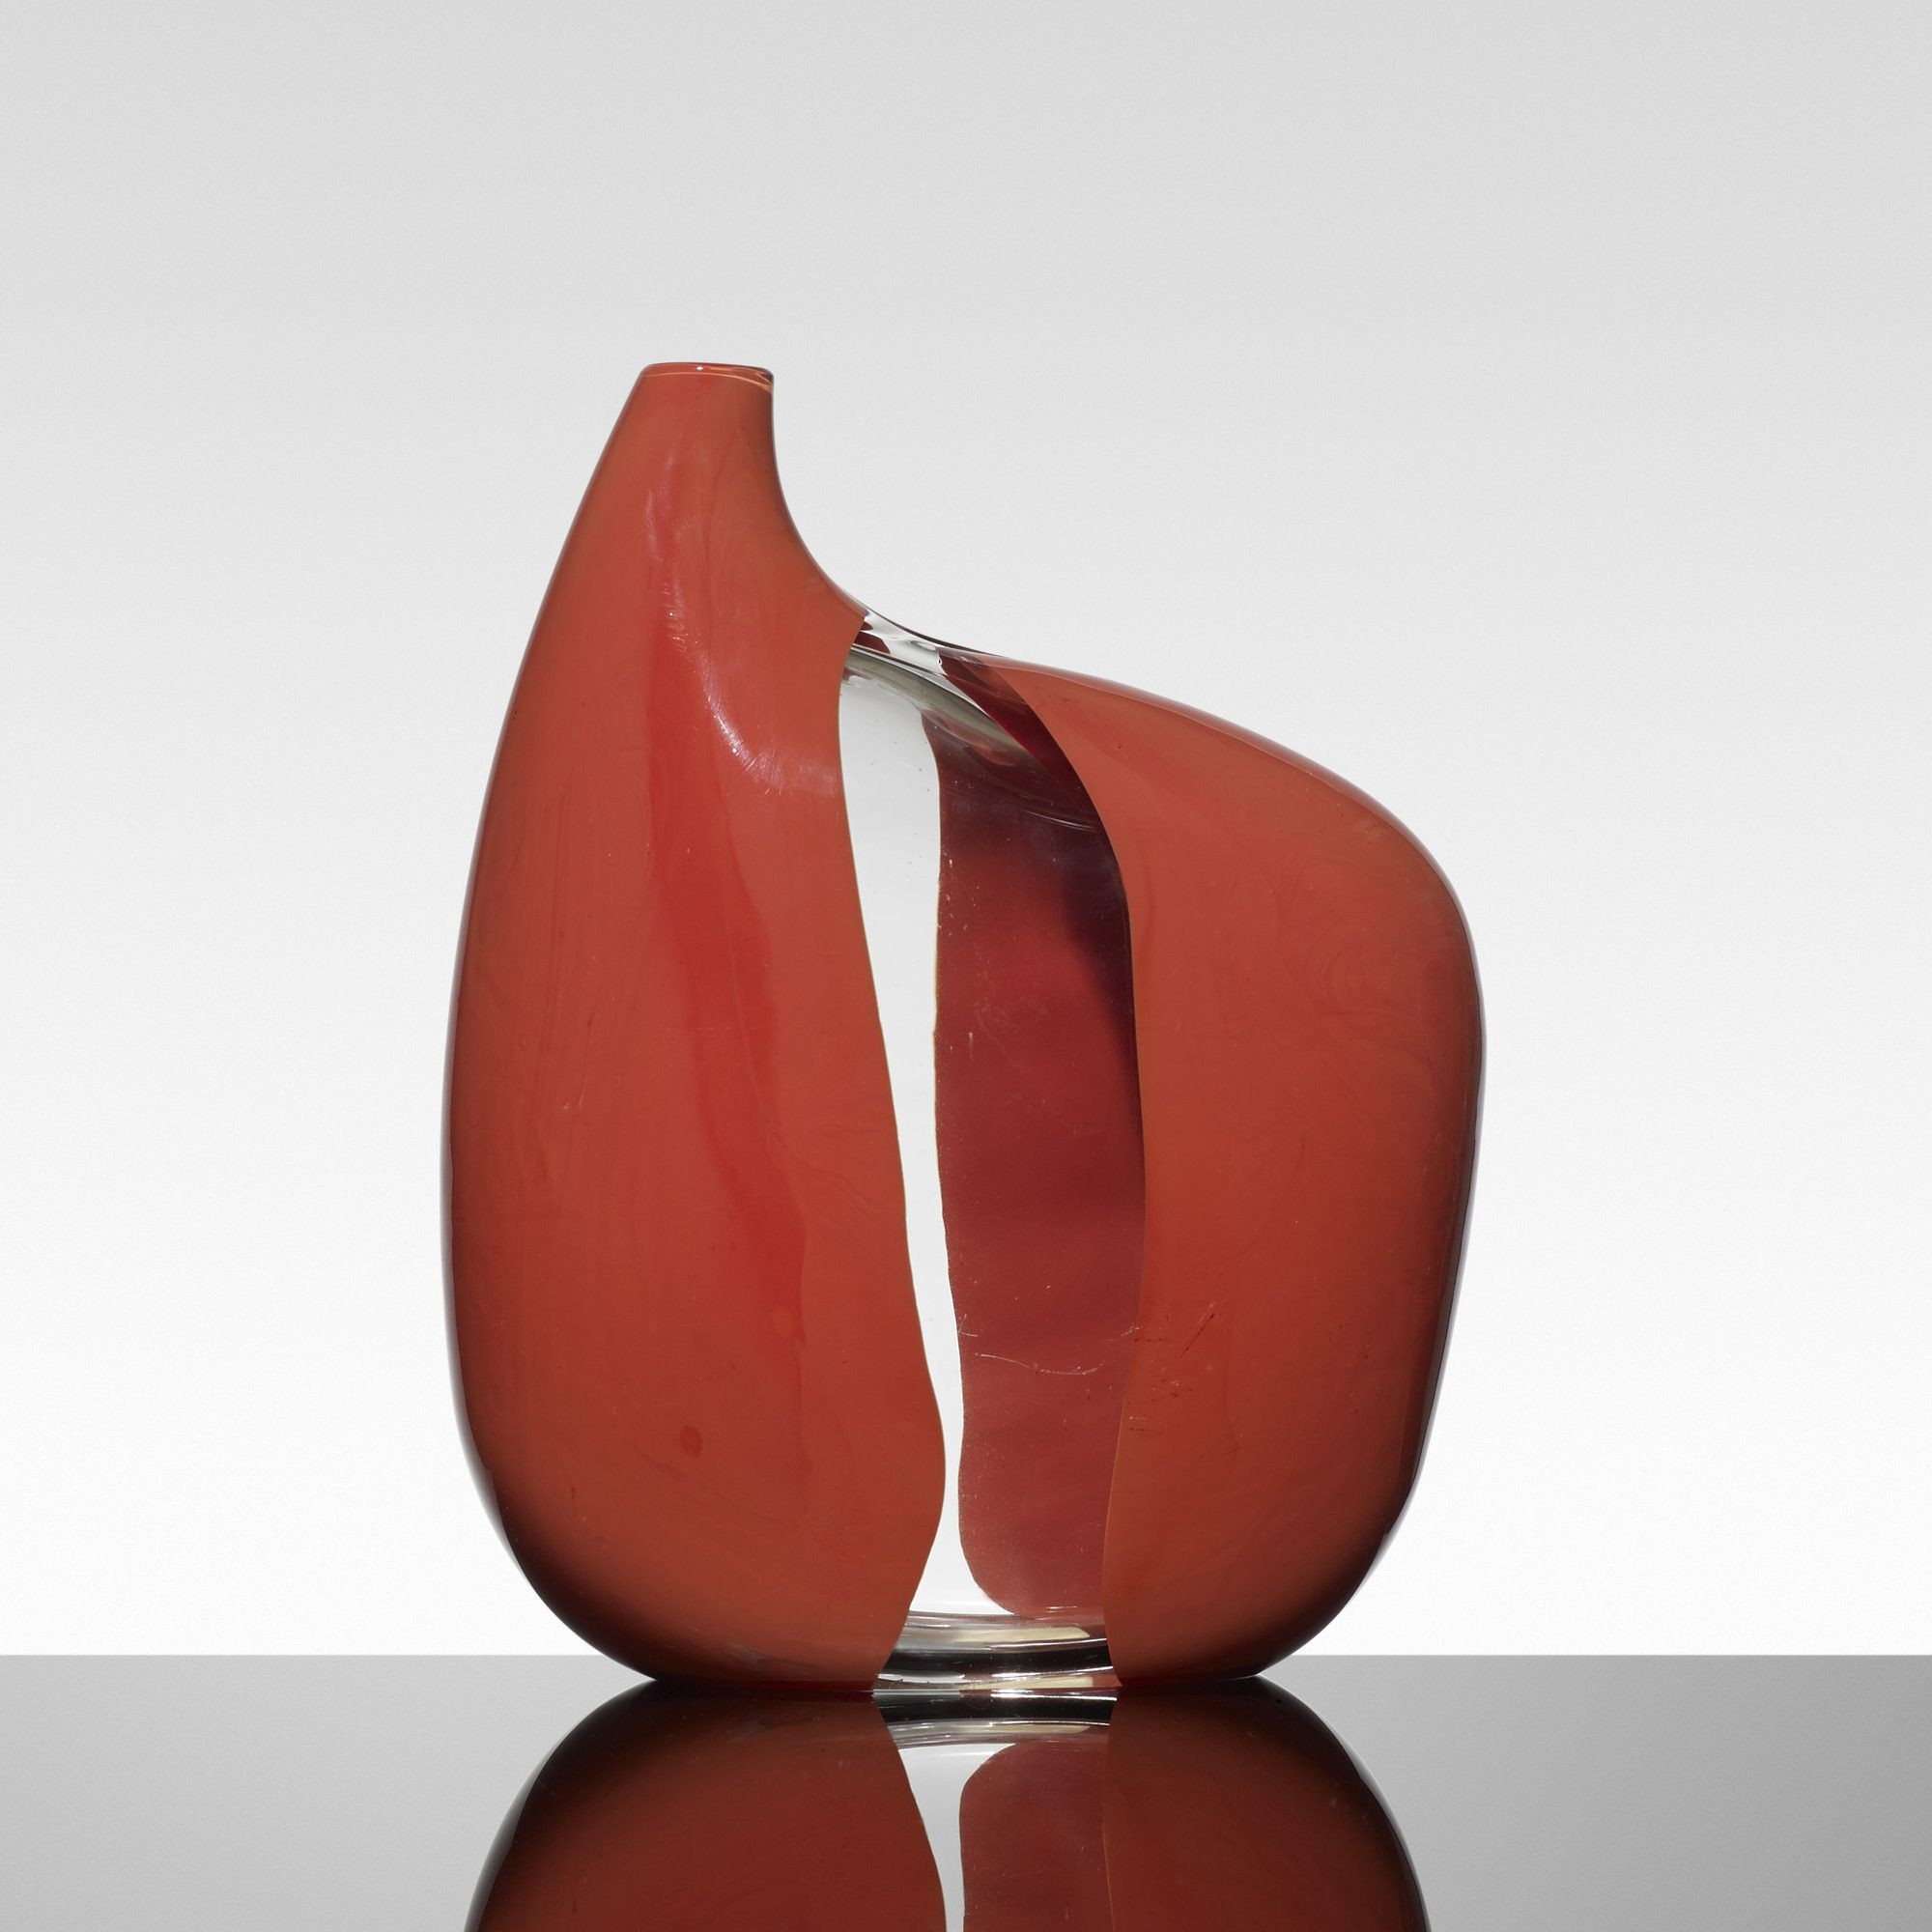 29 Stylish Red Hand Blown Glass Vase 2024 free download red hand blown glass vase of sergio asti asymmetrical vase c 1960 incalmo glass art glass for sergio asti asymmetrical vase c 1960 incalmo glass